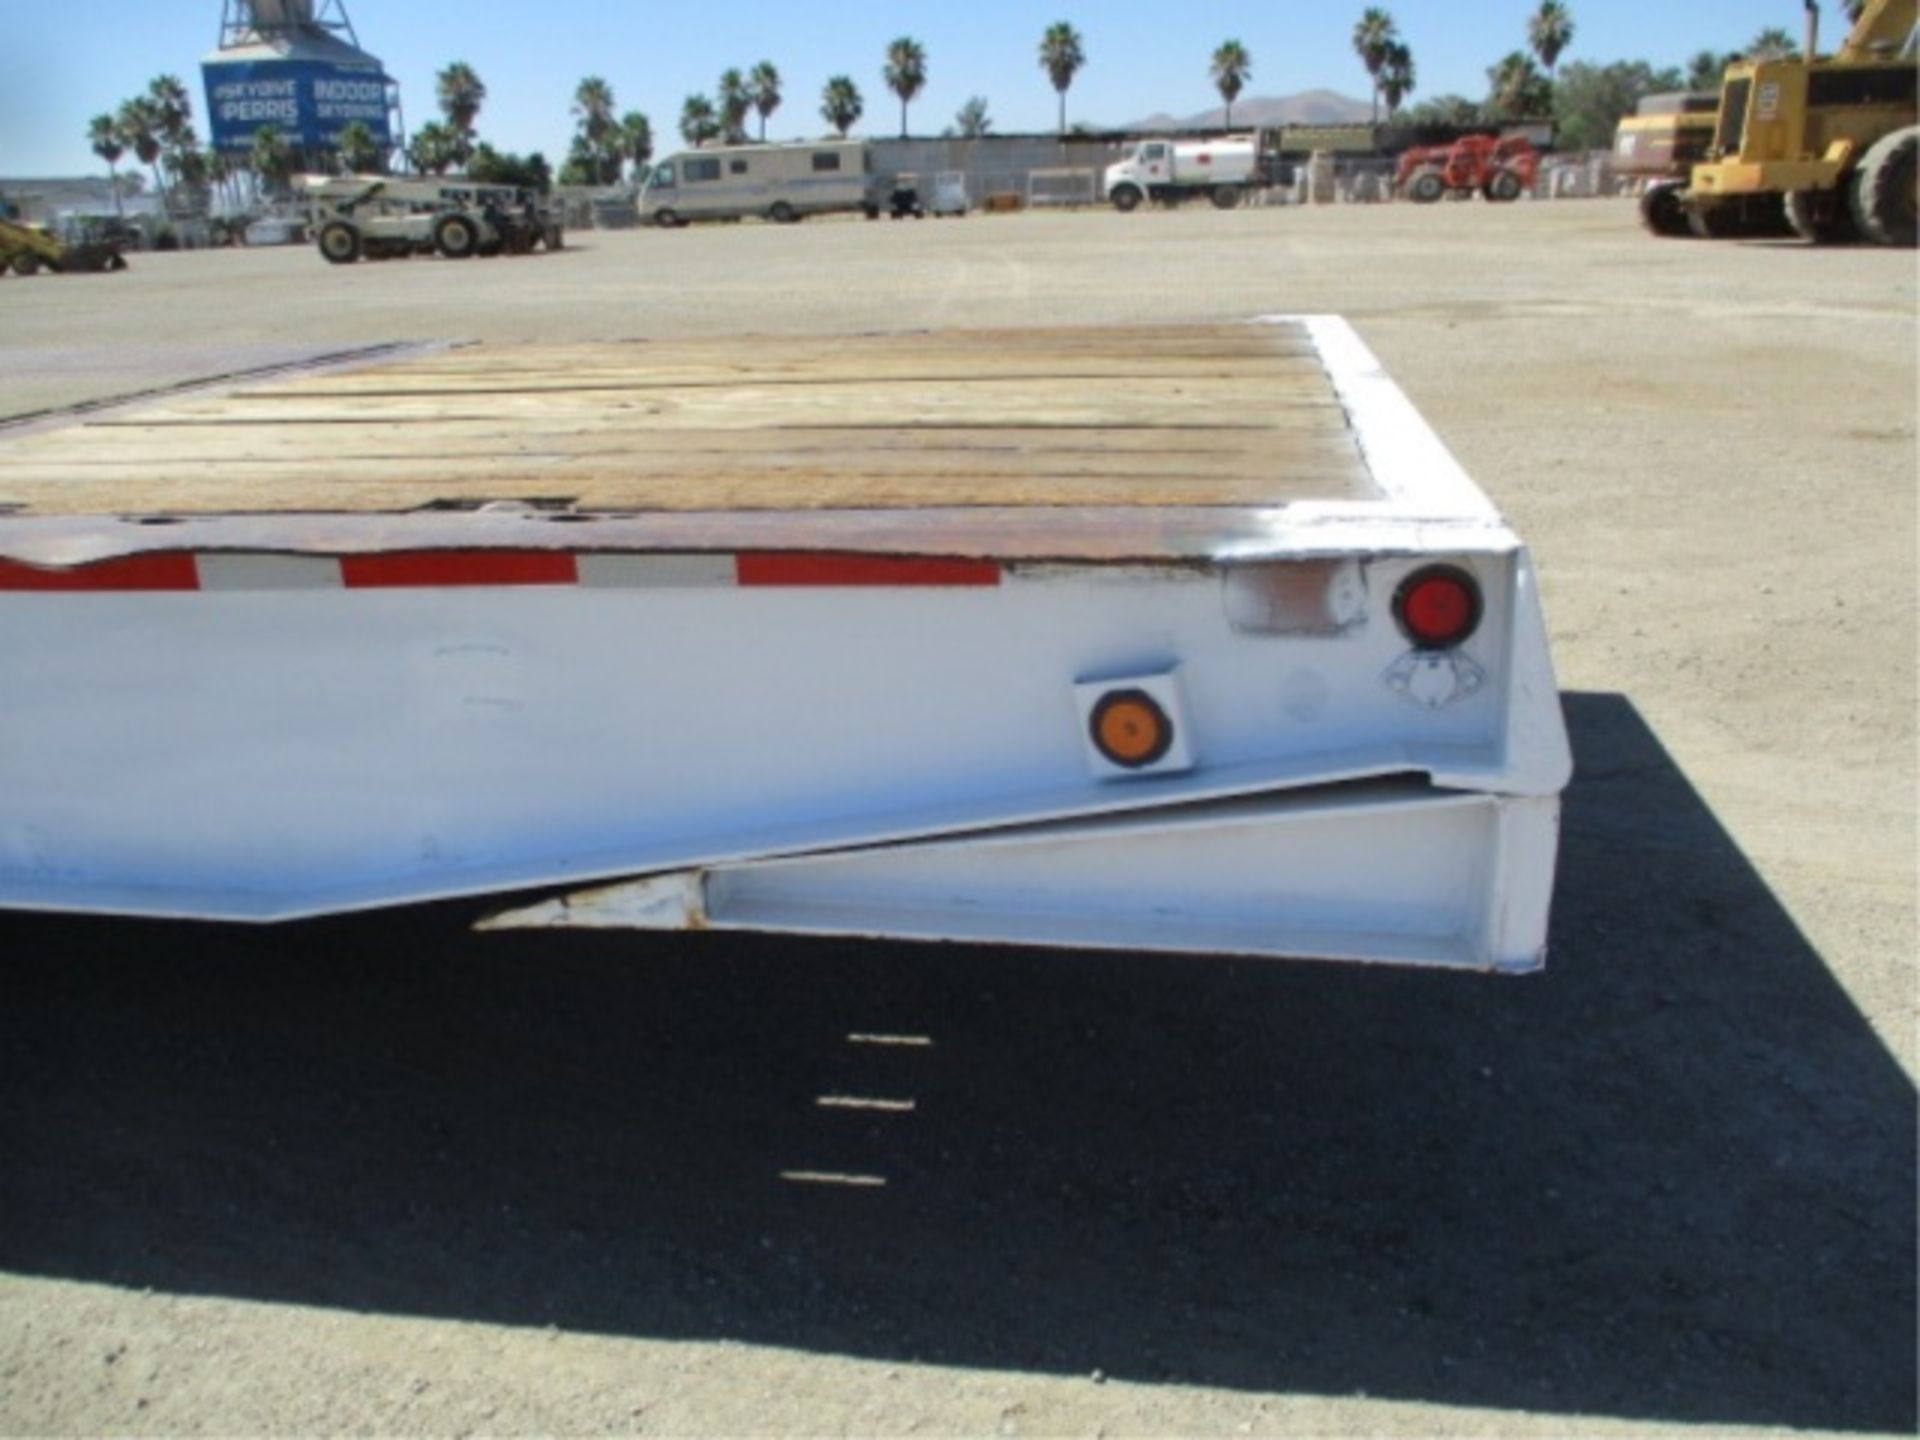 2000 Trail King TK70HT-482 T/A Equipment Trailer, 48', Wood Deck, Hydraulic Dove Tail, 10' Upper - Image 21 of 88